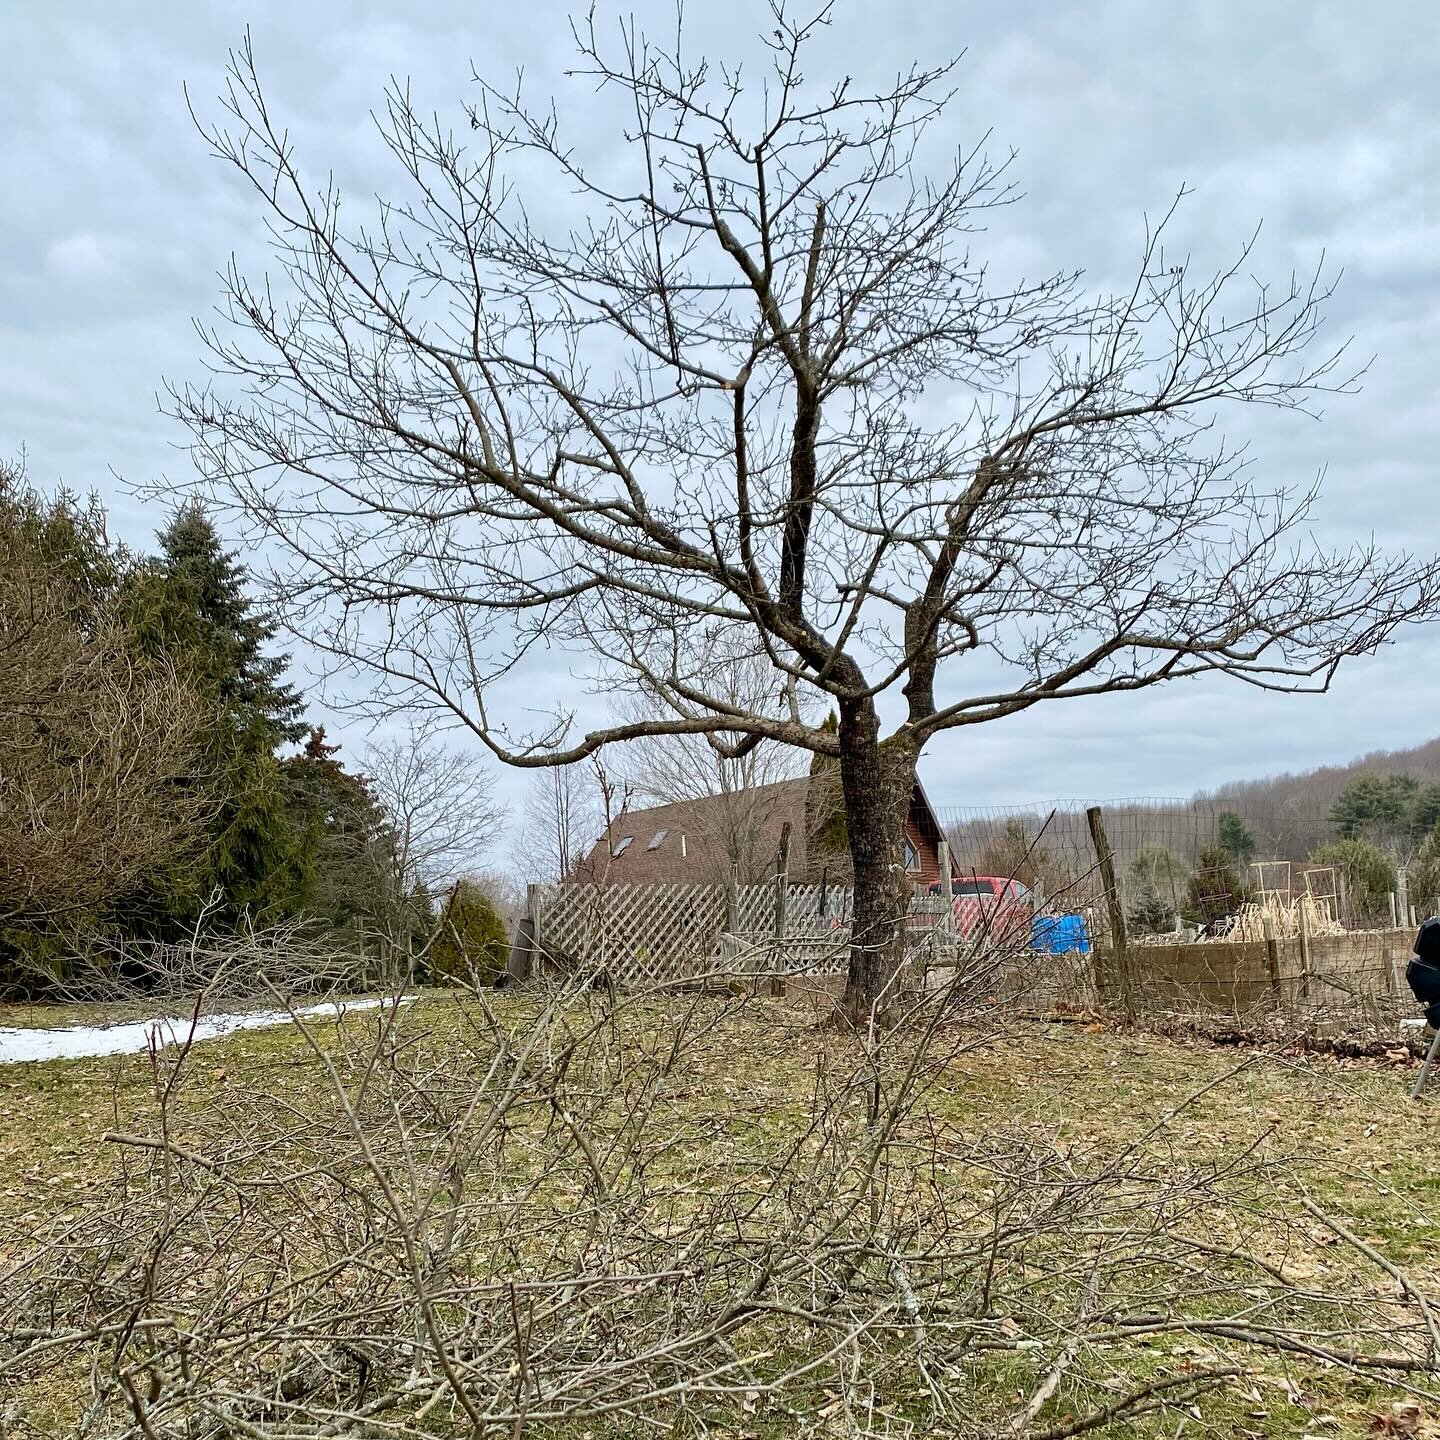 We had an arborist come trim our two apple trees. Hopefully we&rsquo;ll be blessed with some fruit in 7-8 months! We want to turn all the cut off branches into mulch for the property.
.
.
.
#newadventures #newadventure #tryingsomethingnew #homesteadi